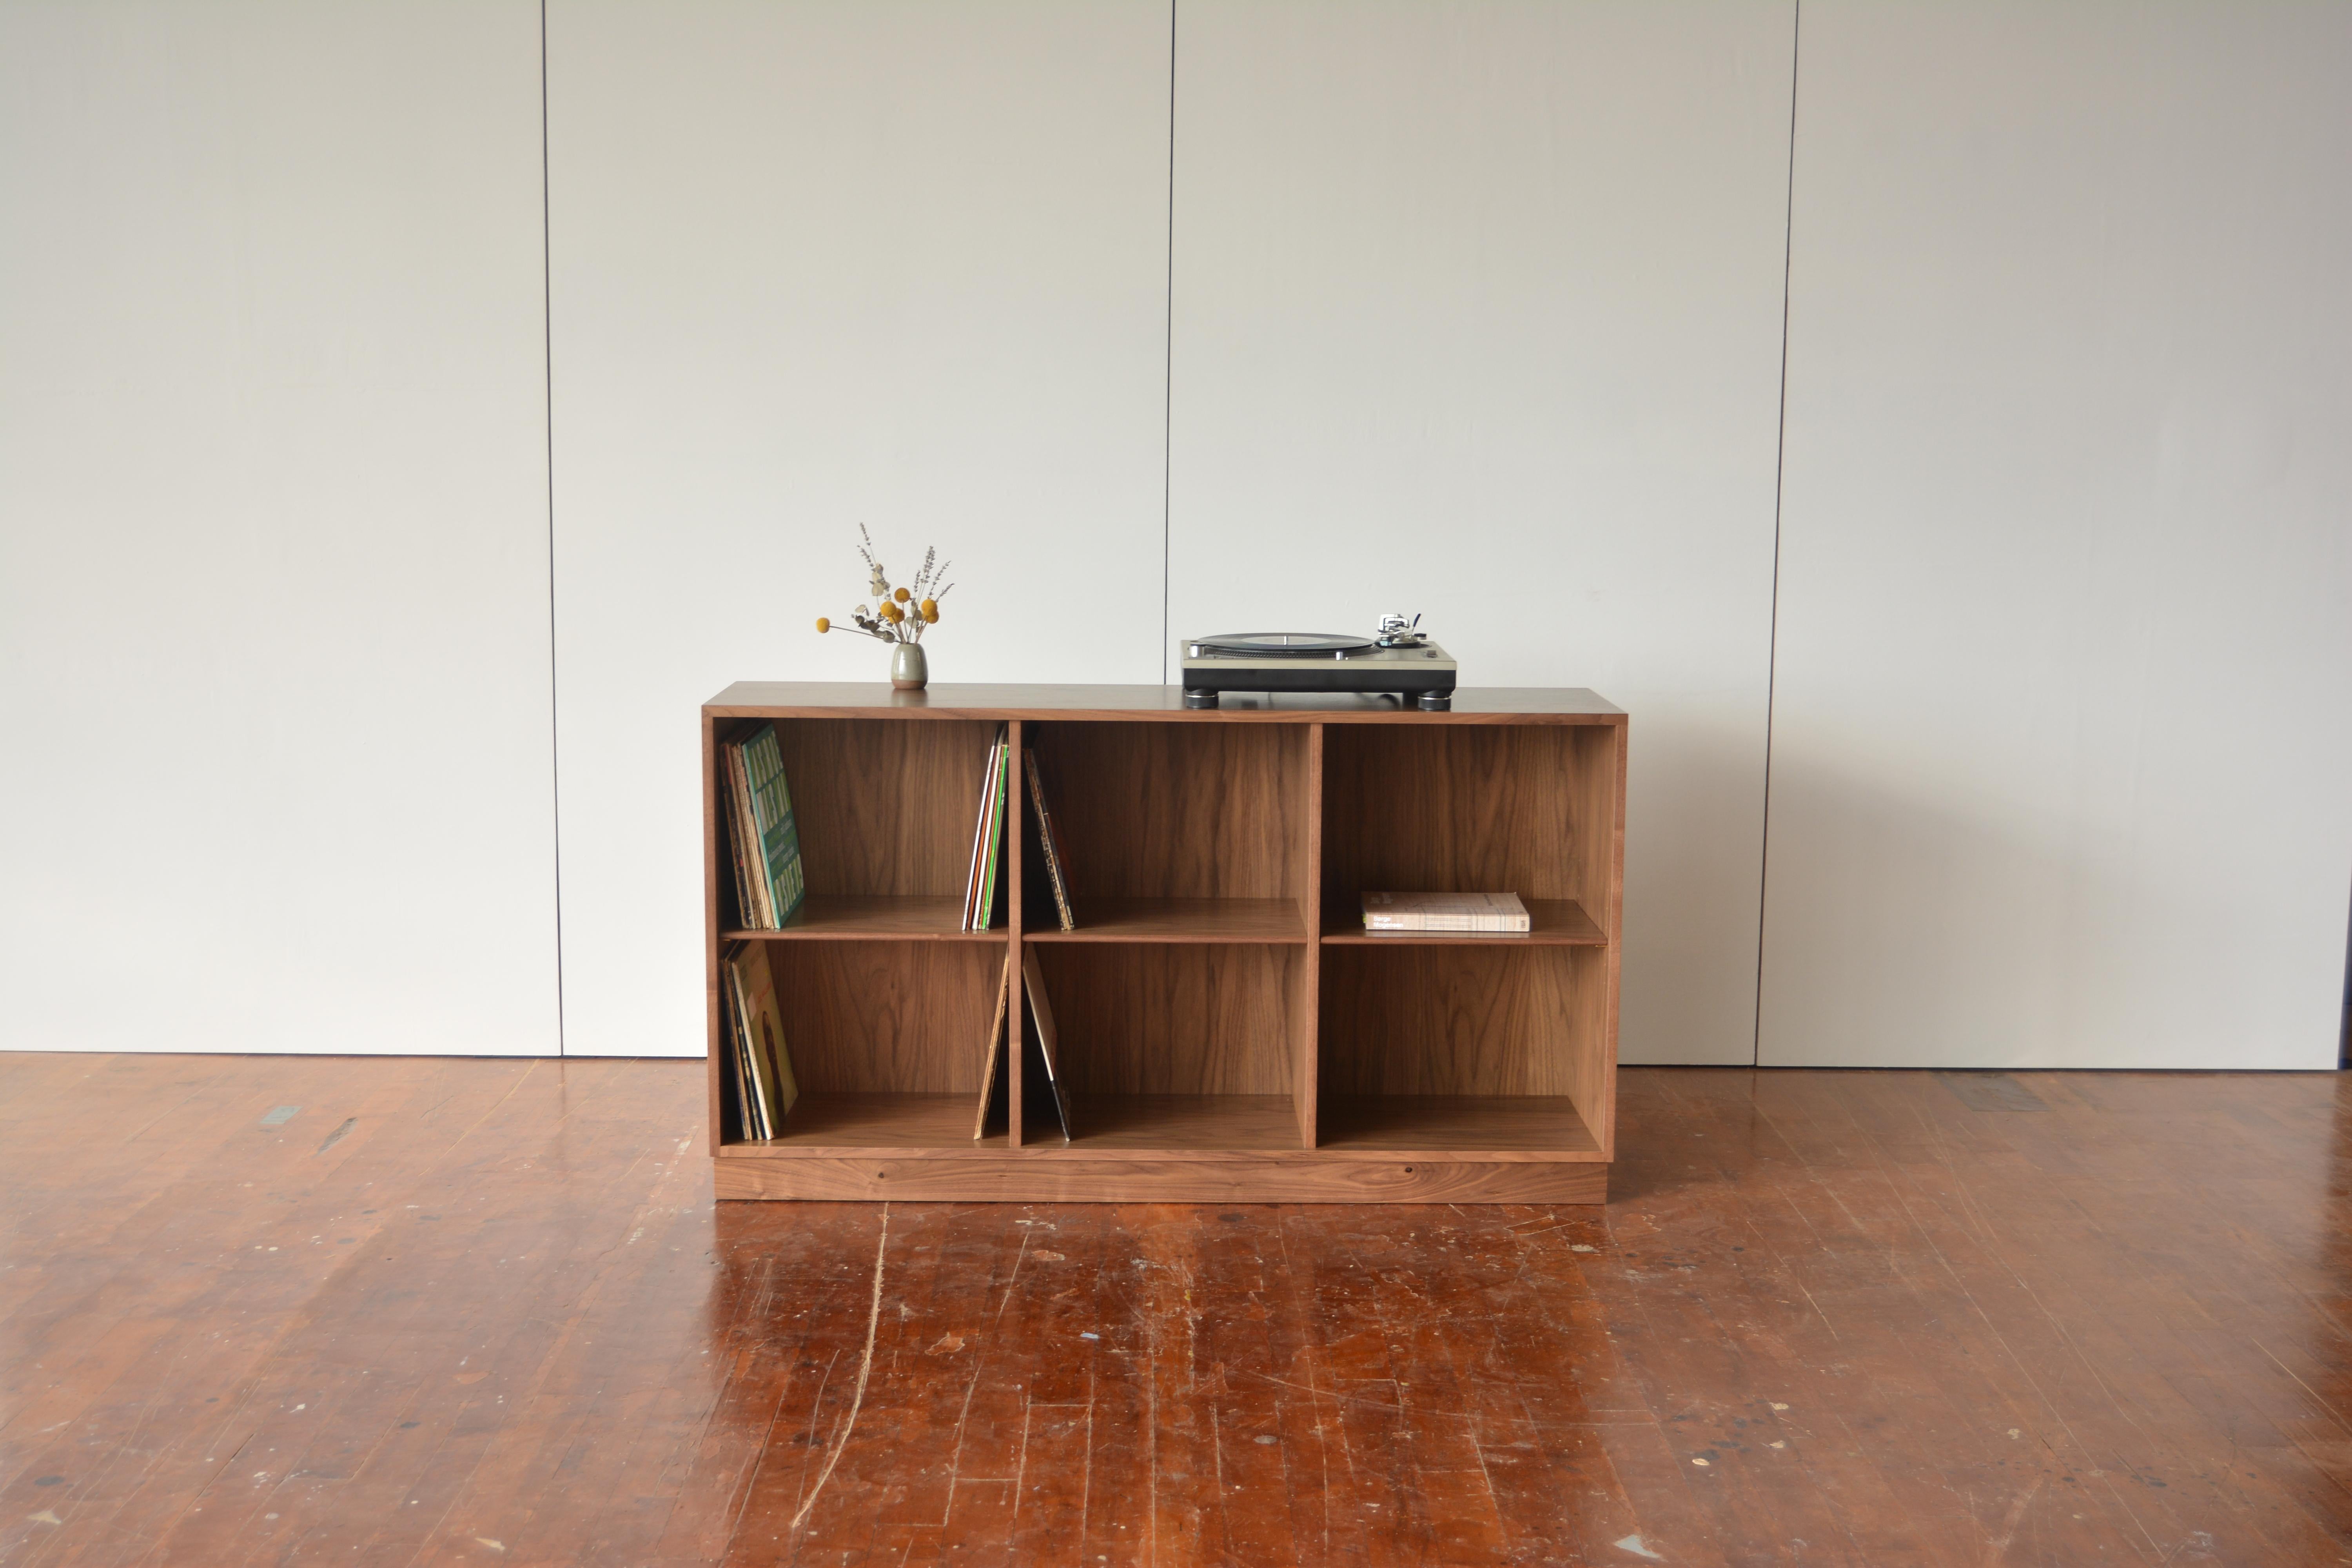 This low and deep bookshelf is sized for the storage and display of records or art books. An interior depth of 14.5